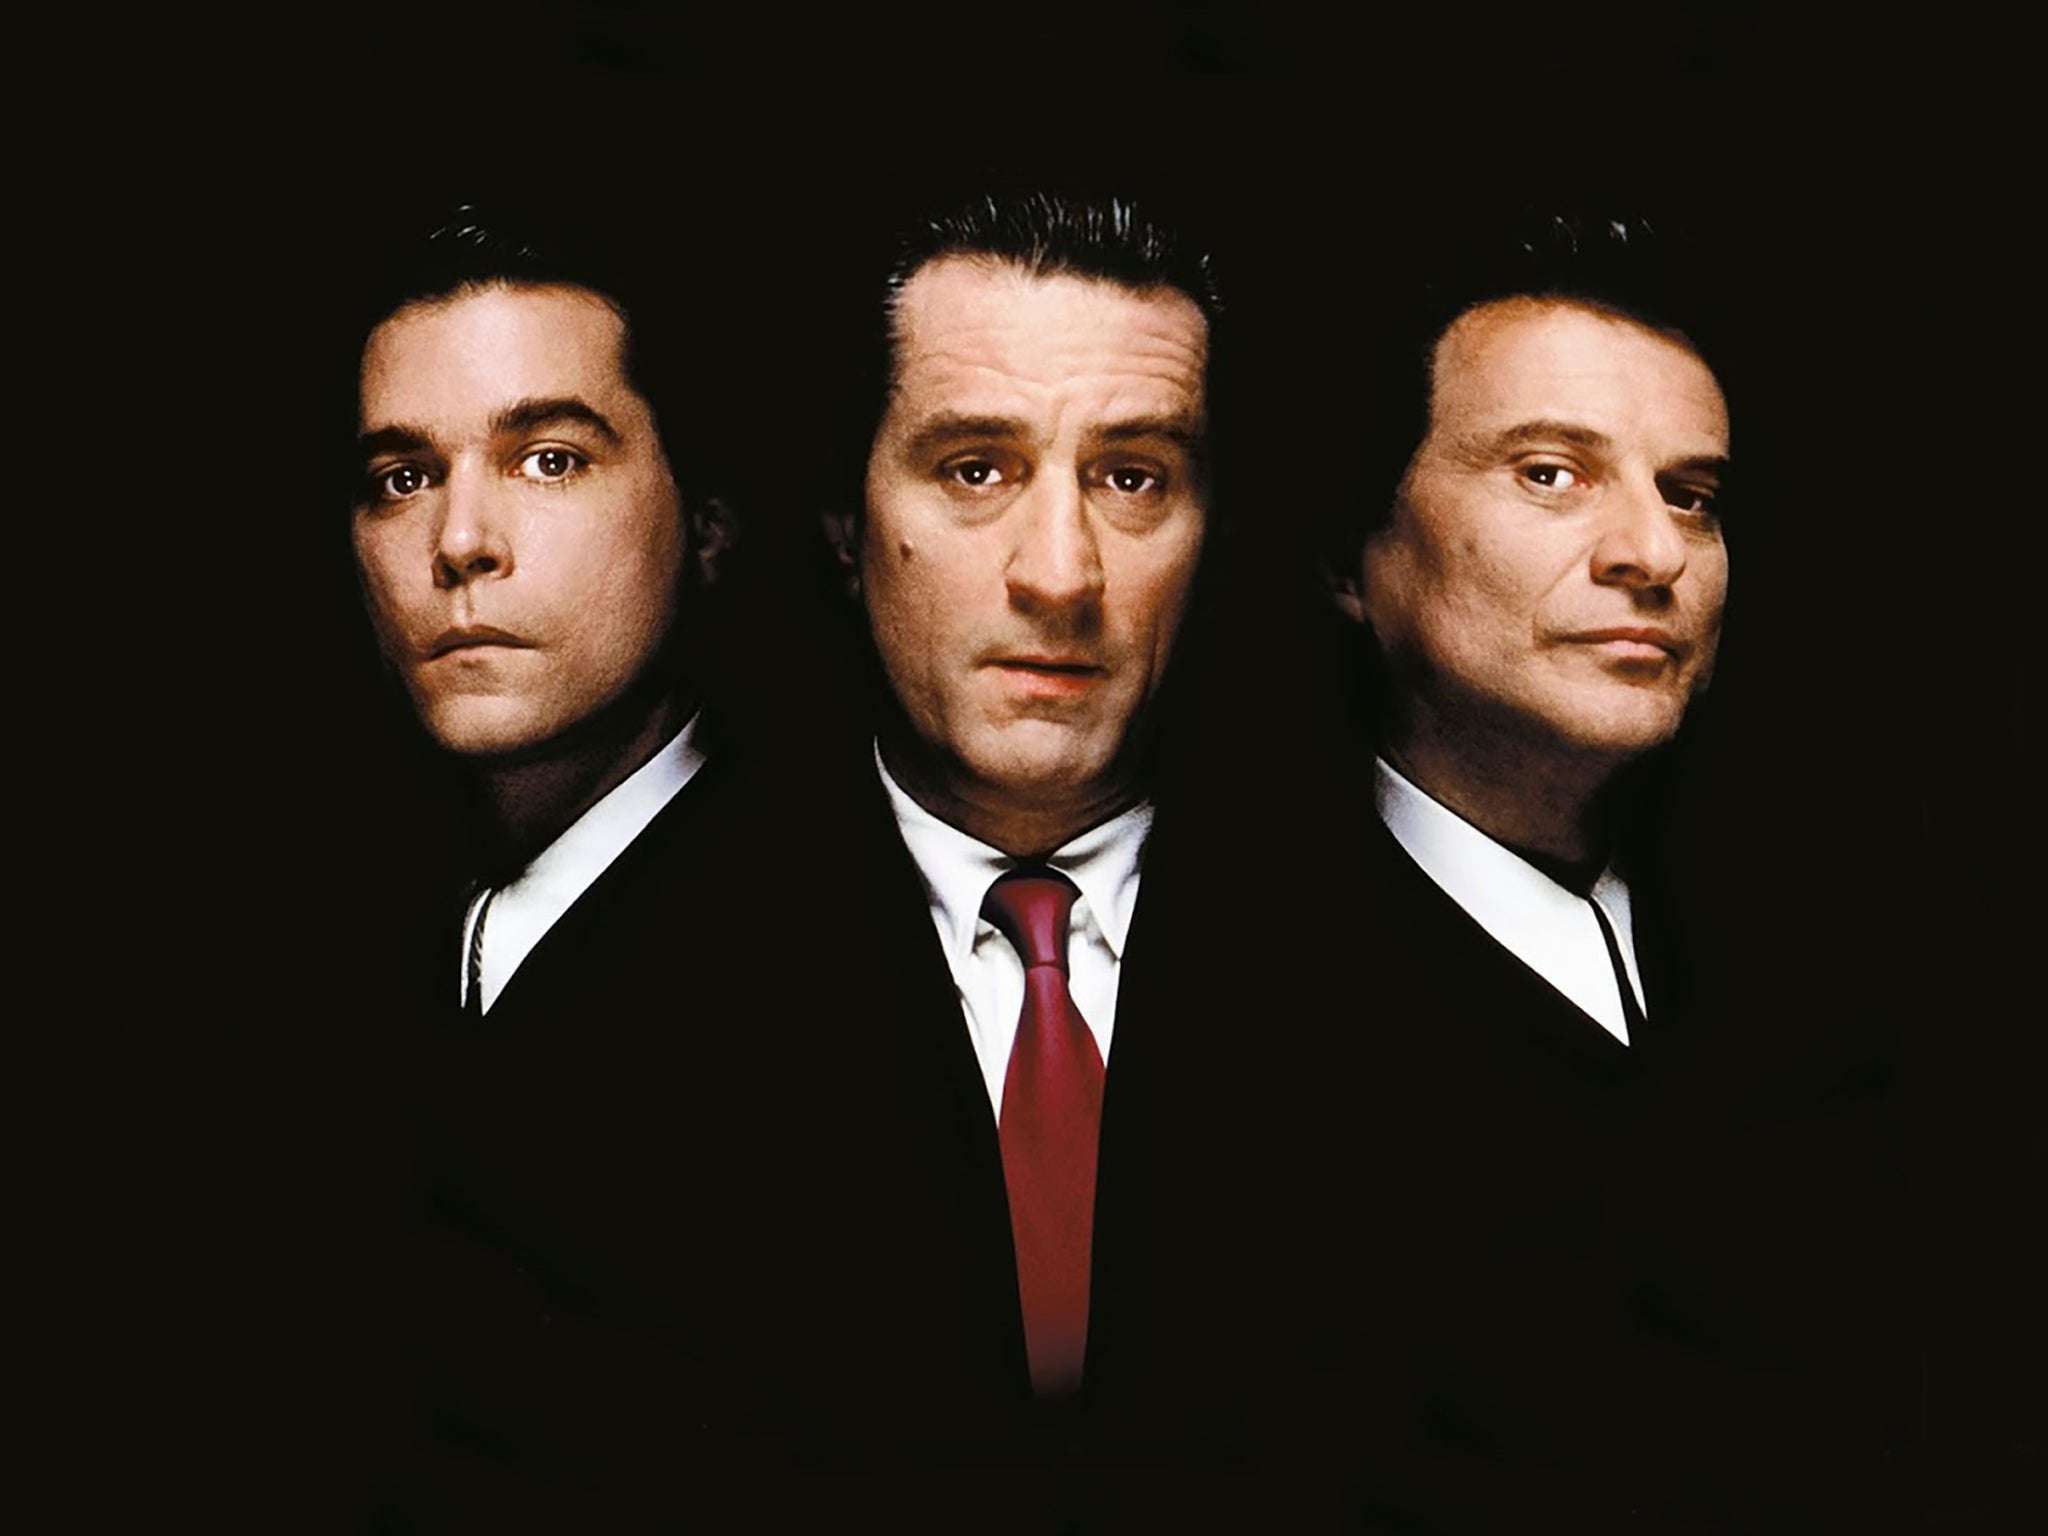 image for ‘As far back as I can remember...’: Goodfellas is still the greatest gangster movie ever made